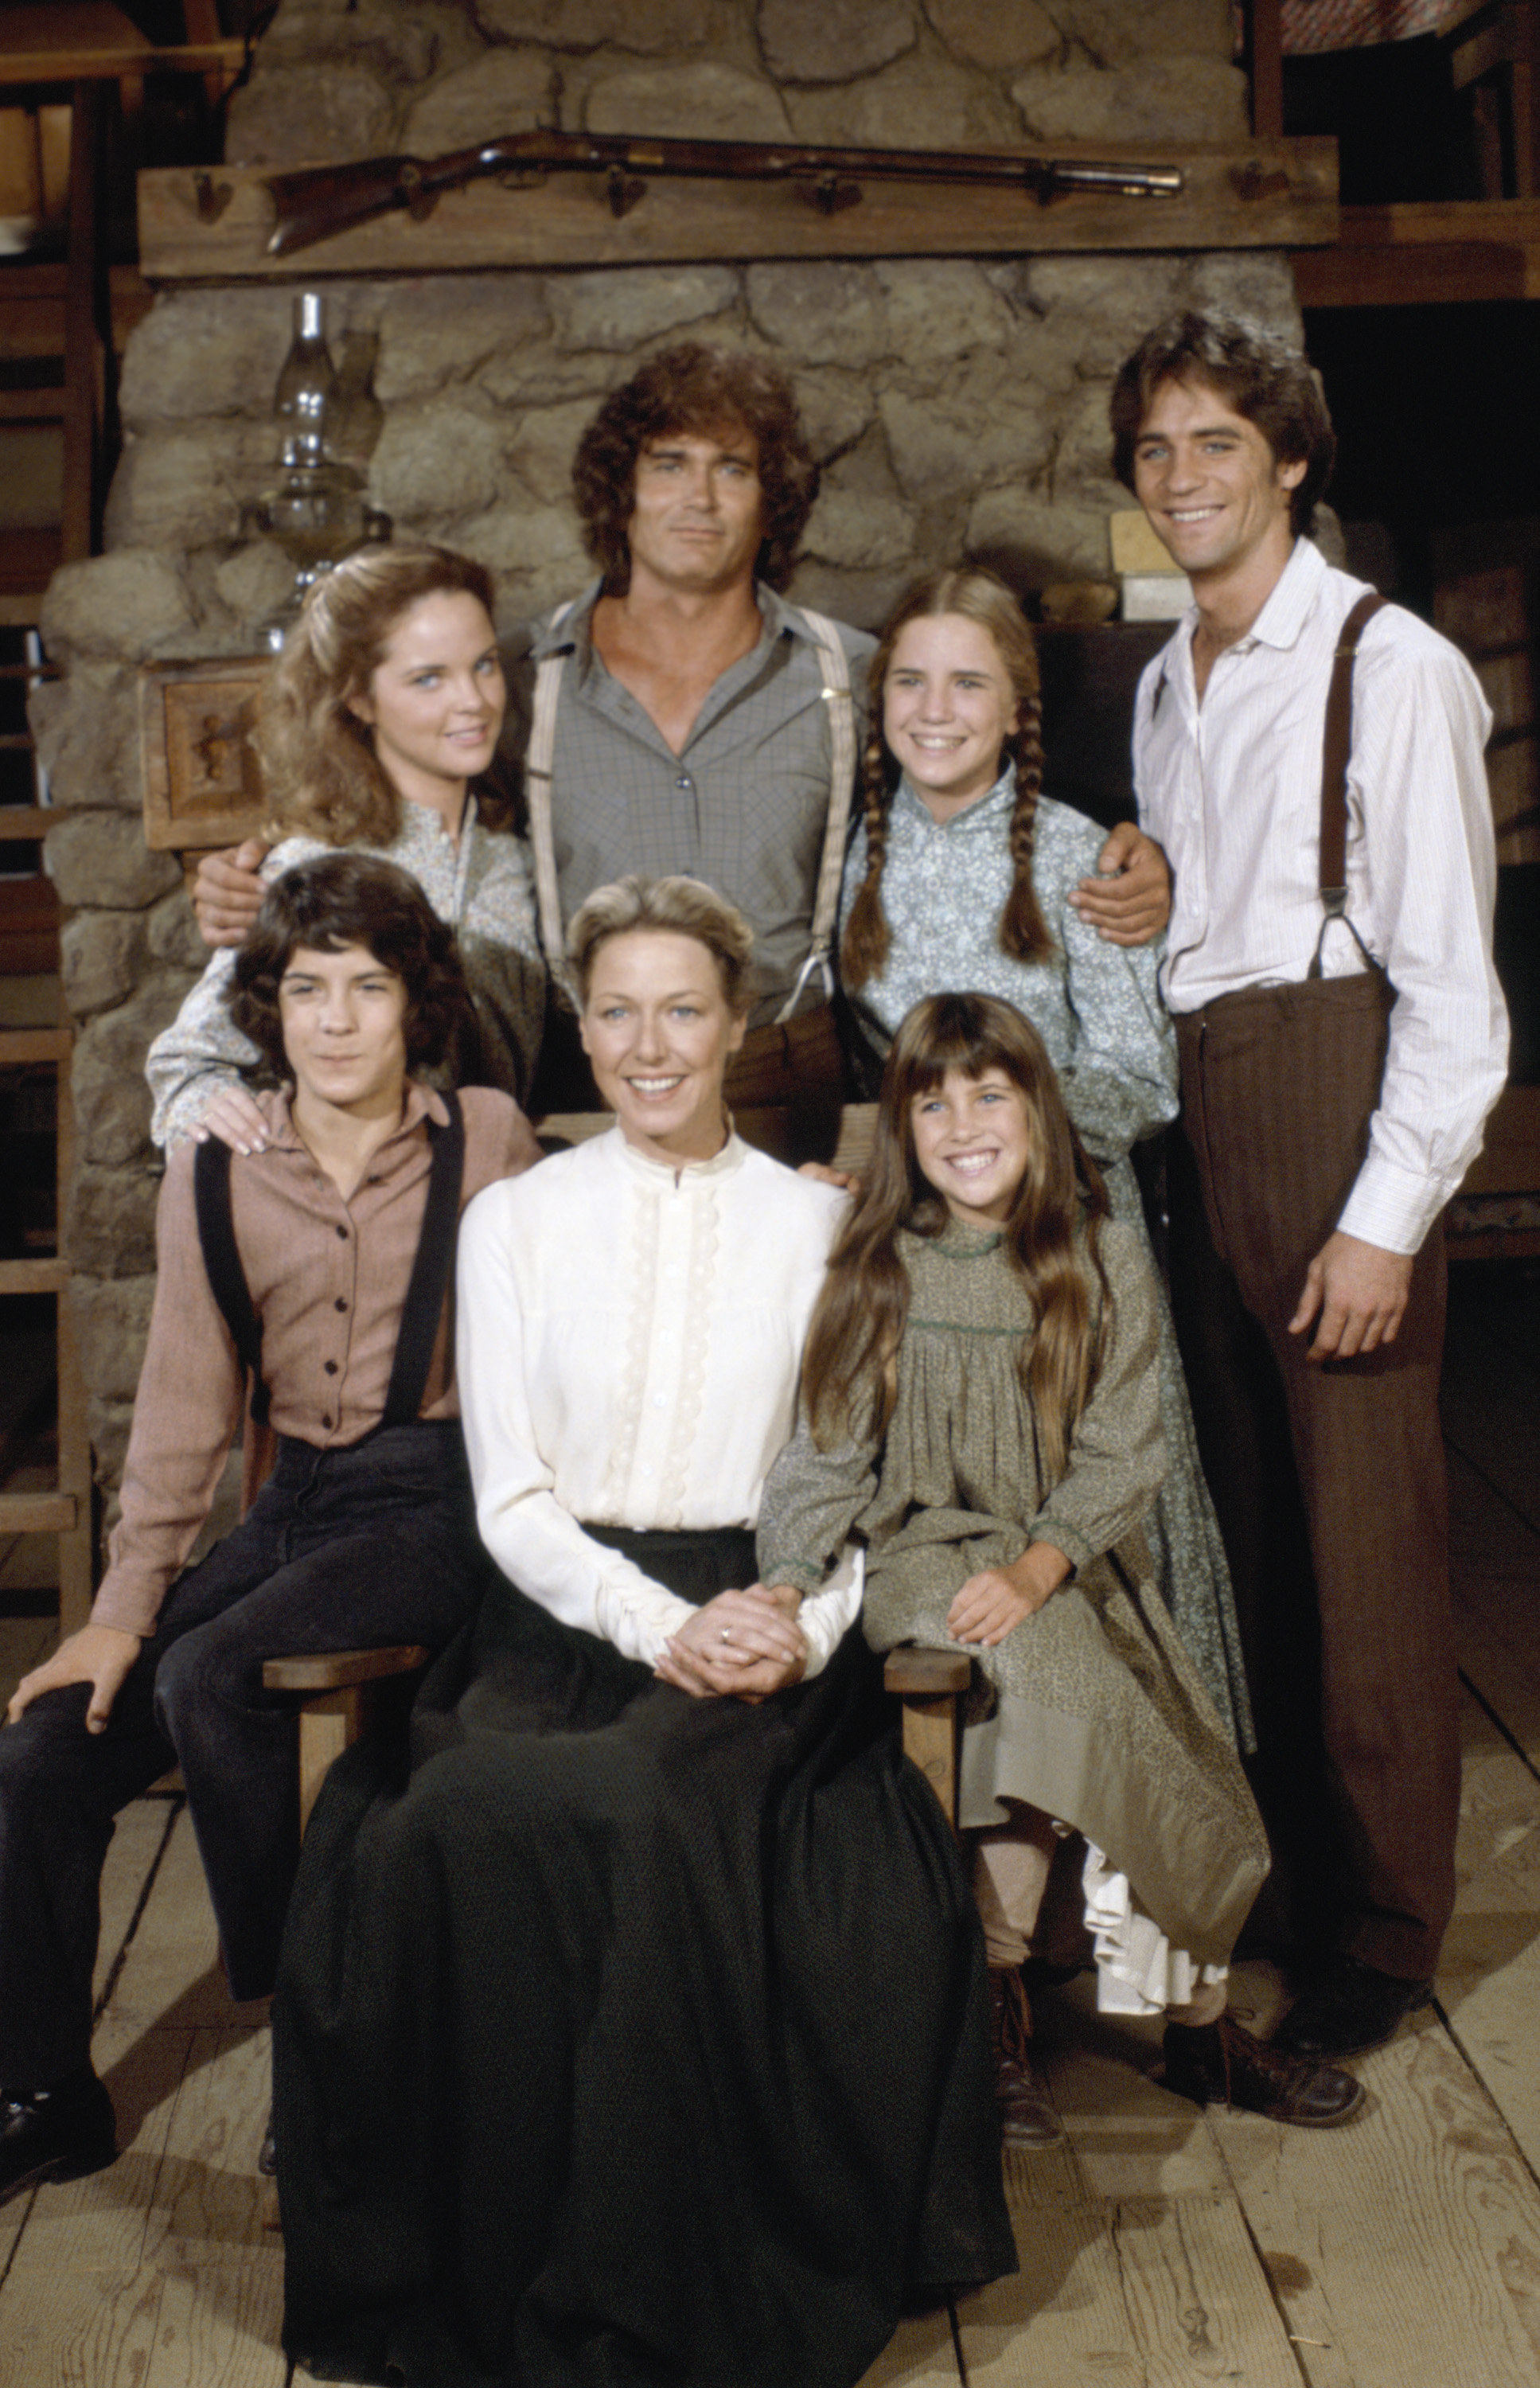 "Little House on the Prairie" cast photographed in circa 1980's | Source: Getty Image